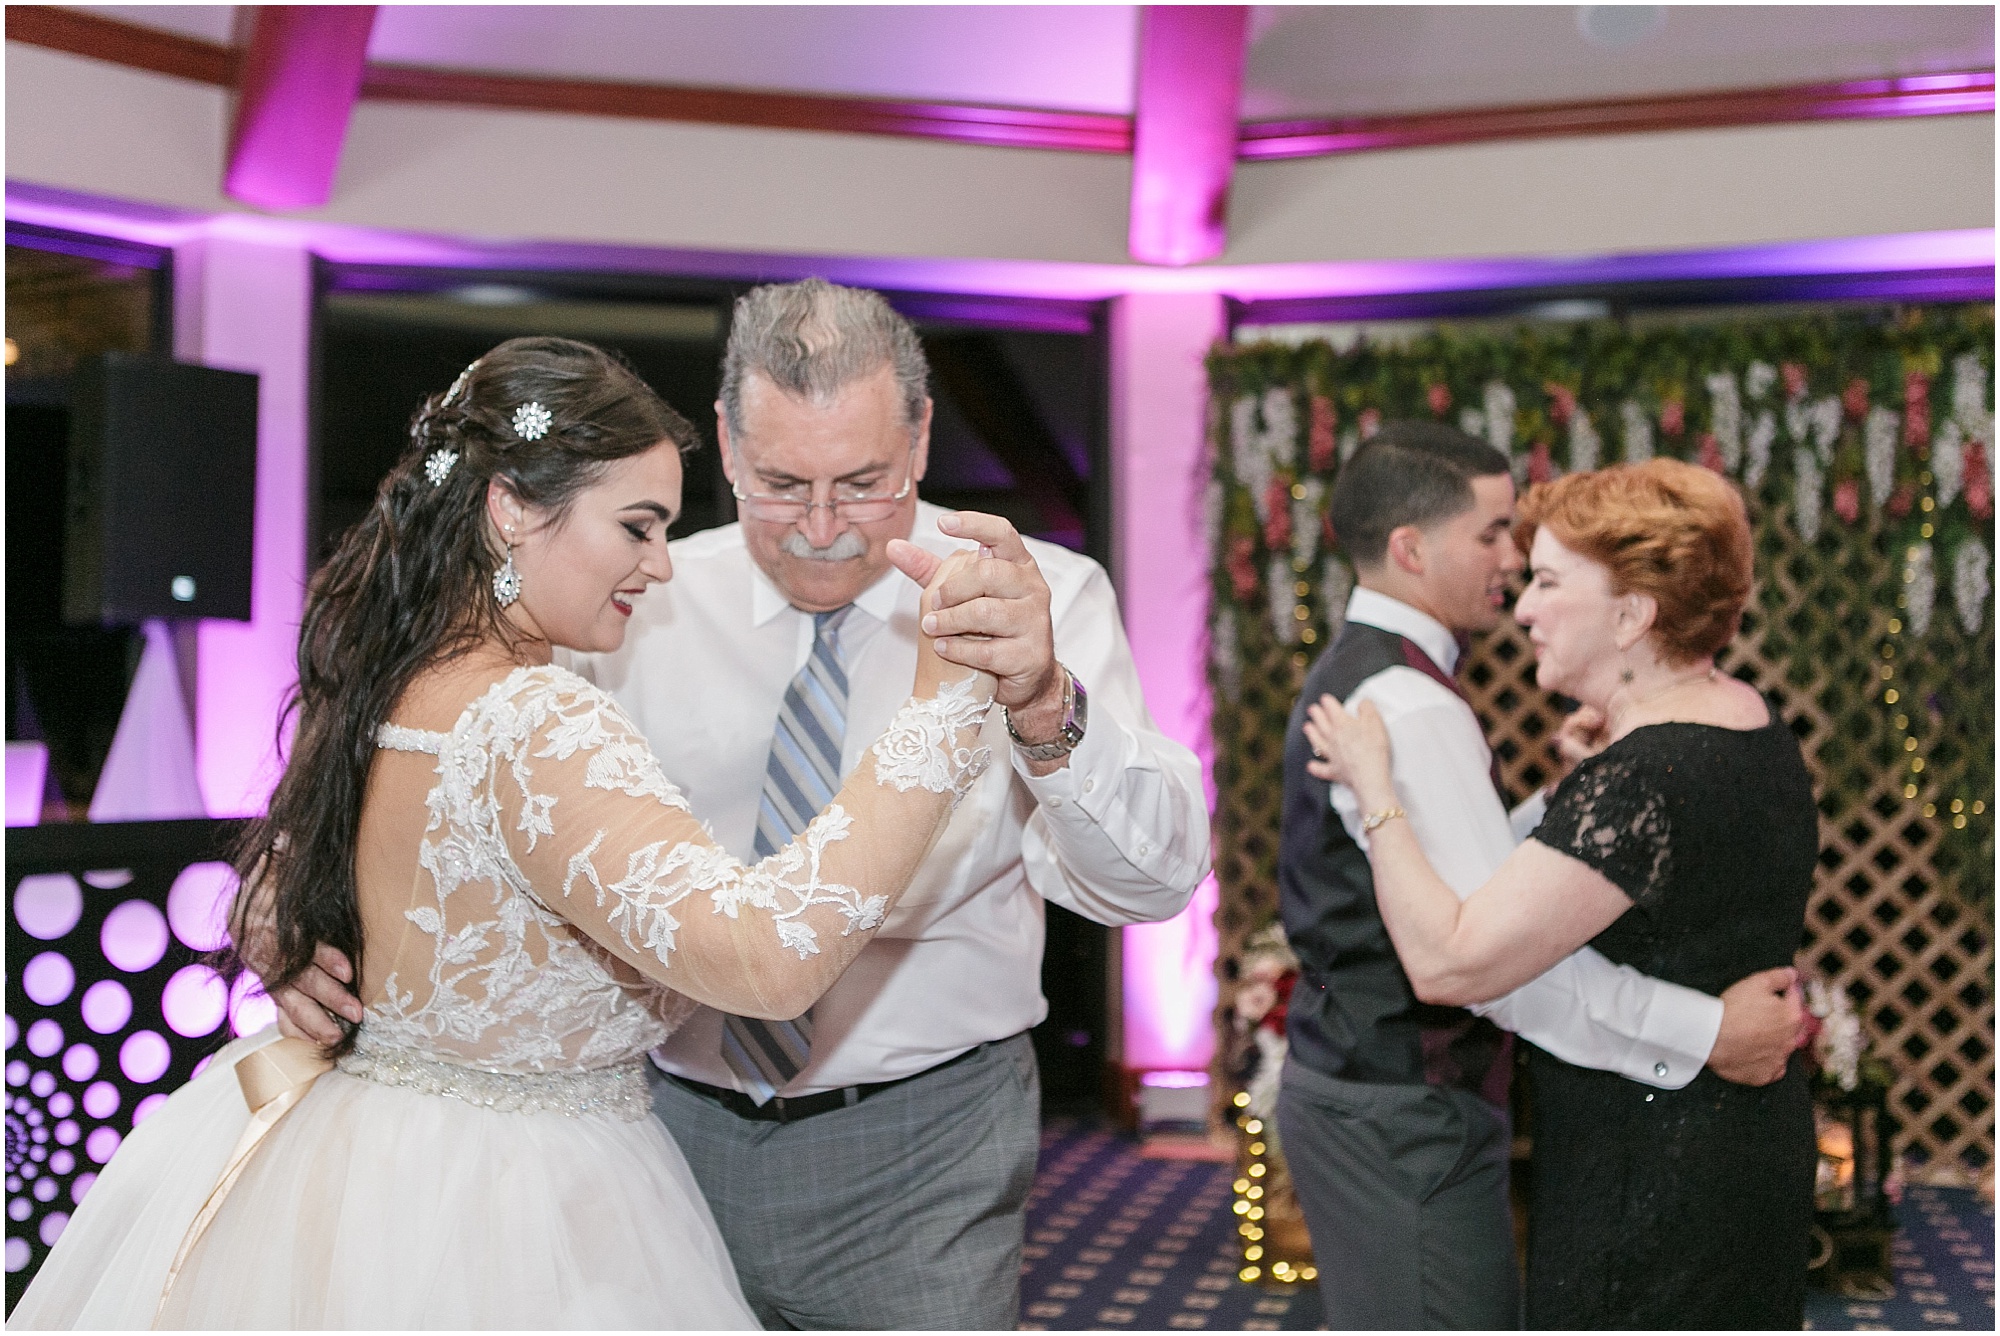 Bride and groom dance with family members at their reception. 